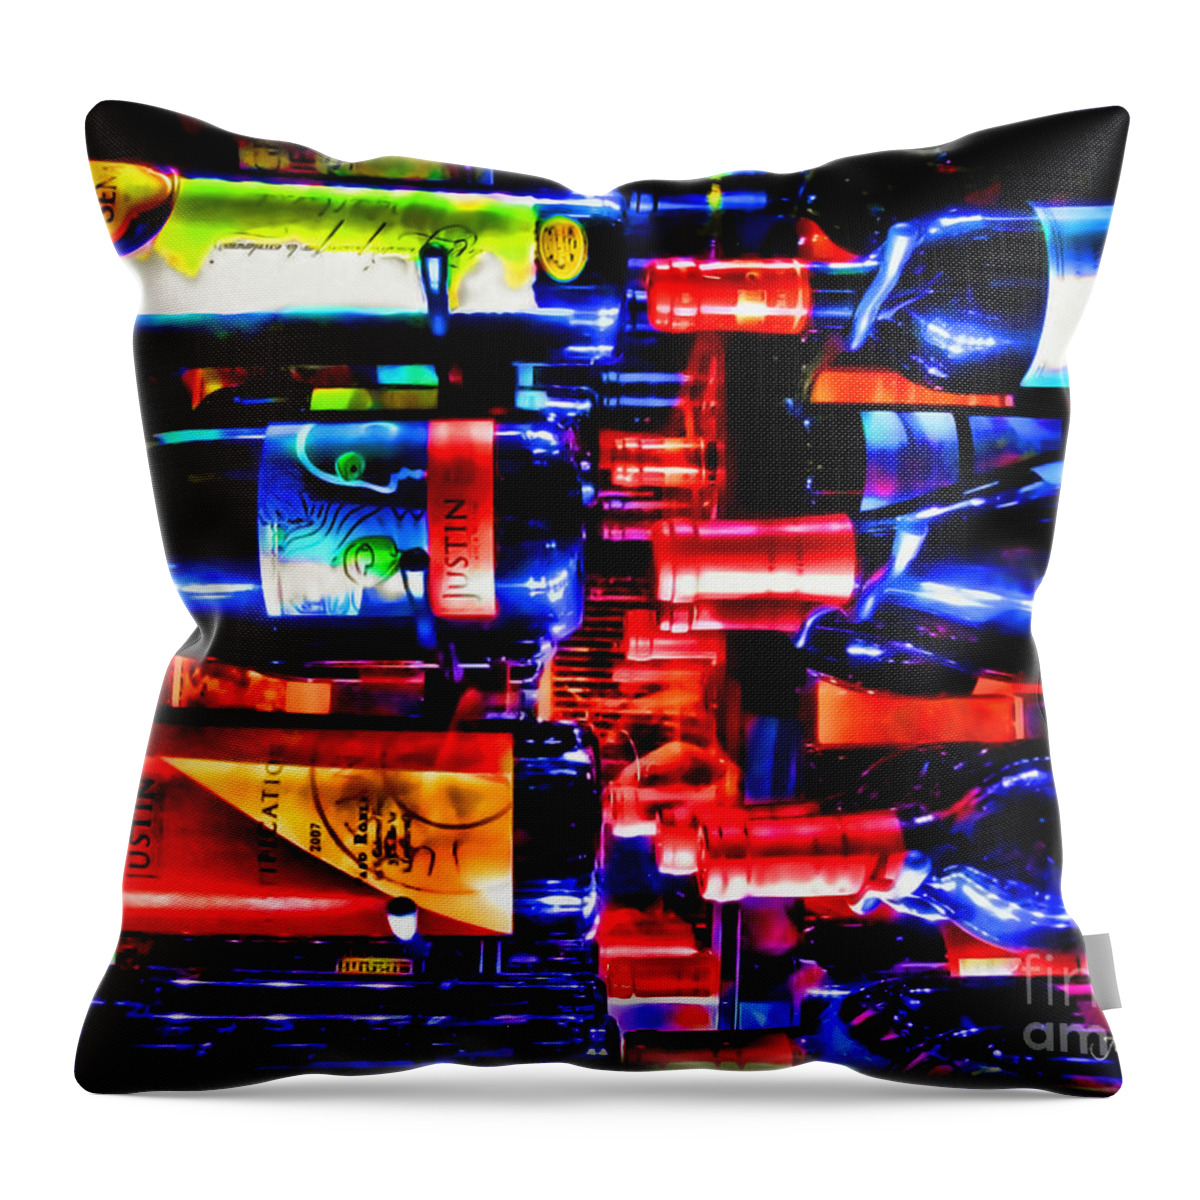 Wine Throw Pillow featuring the photograph Wine Bottles by Joan Minchak